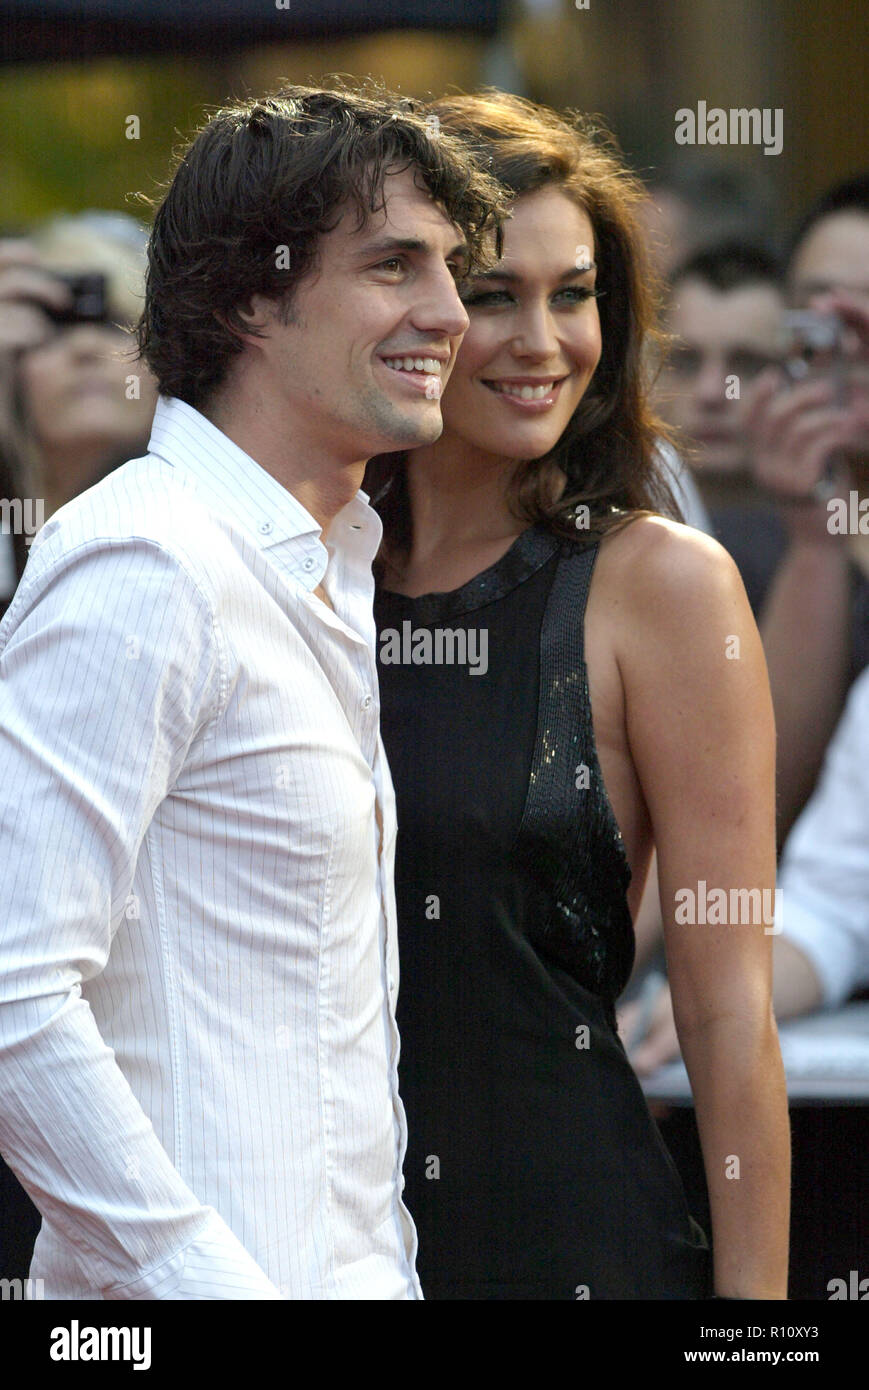 Megan Gale and Andy Lee The premiere of the James Bond 007 'Quantum Of Solace' movie at the Entertainment Quarter. Sydney, Australia. 15.11.08. Stock Photo